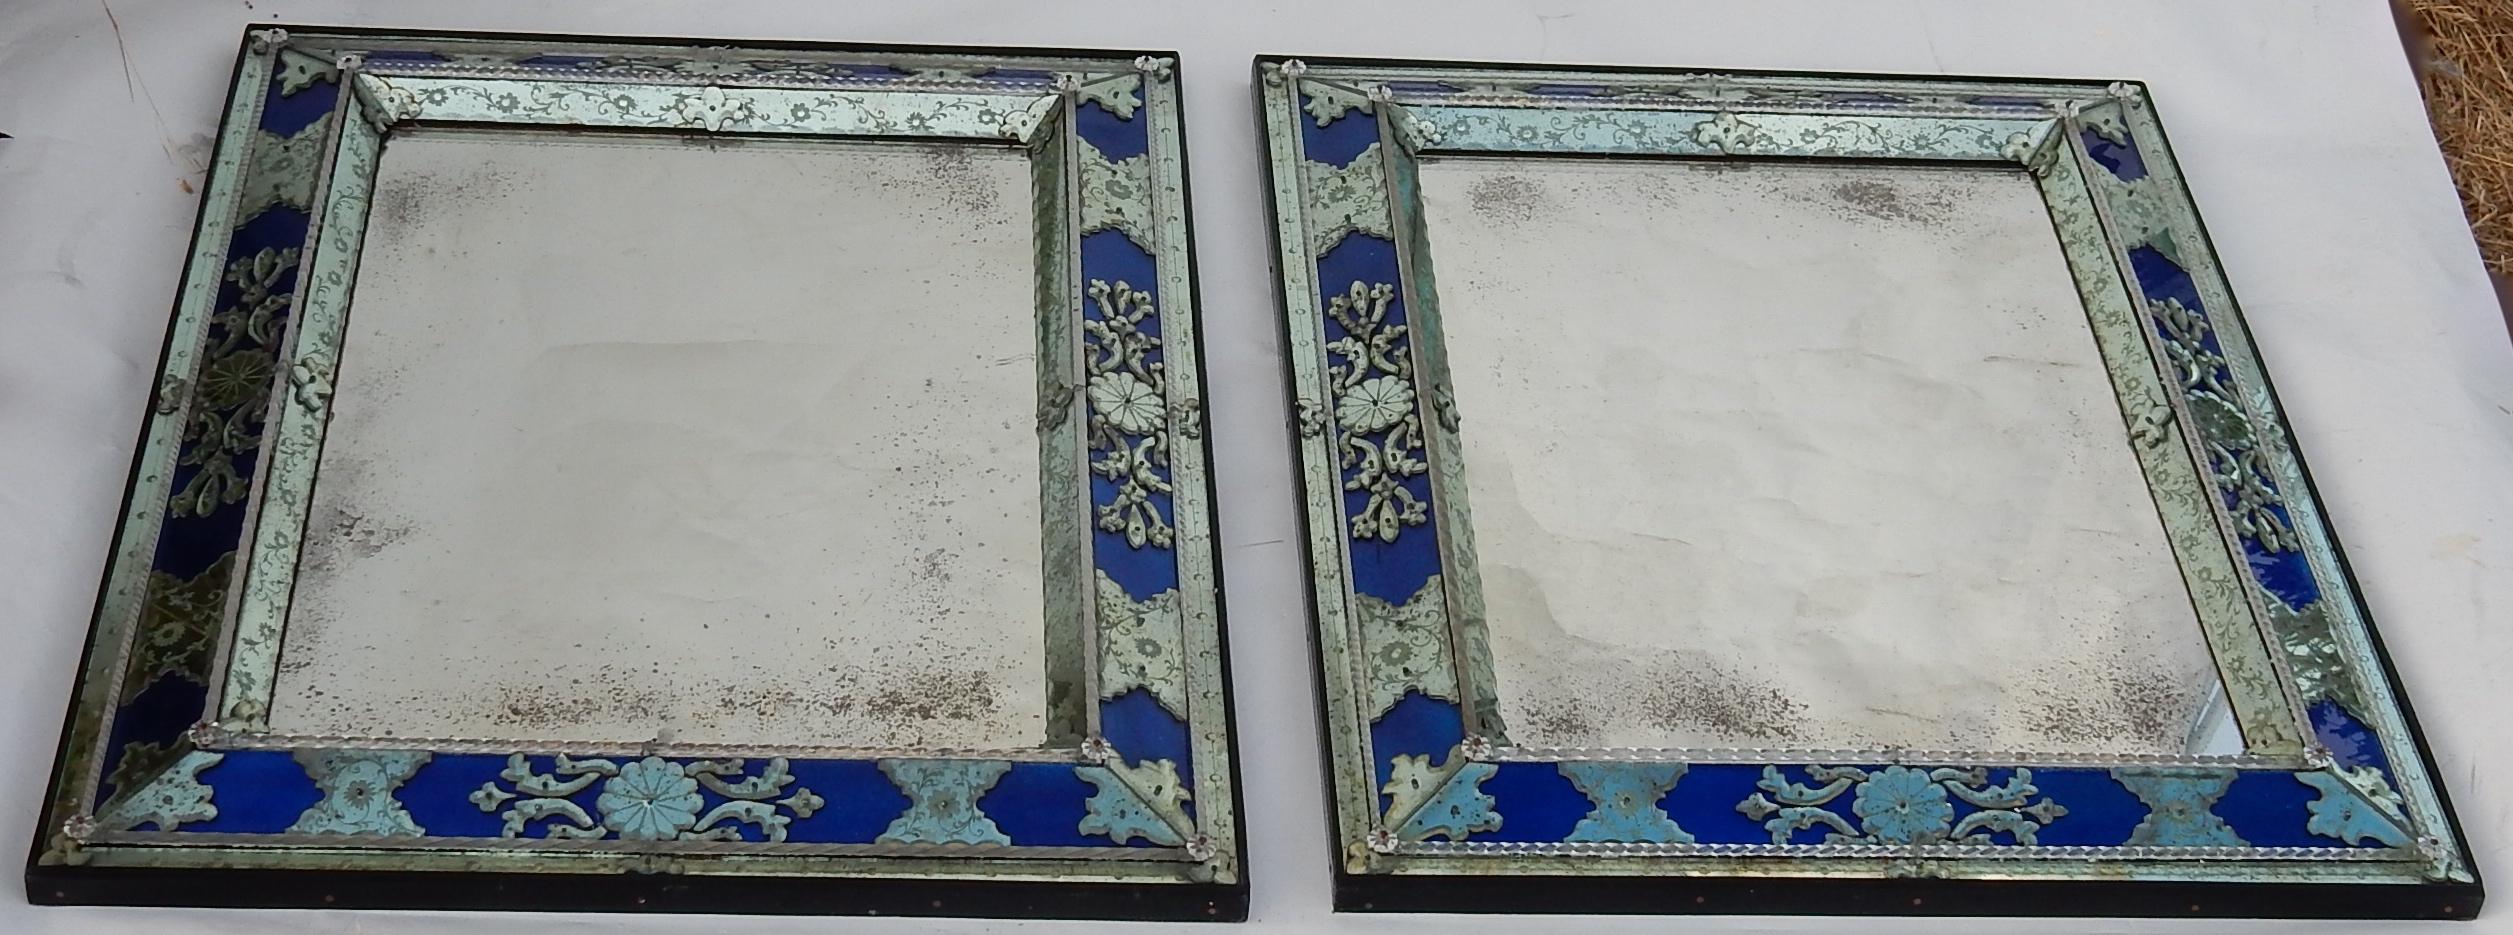 Pair of Italian Louis XIV style mirrors with aged oxidized mirrors, commissioned artisanal work, the center is adorned with a bowl with engravings, and the frame alternates between blue glasses and mirror elements. Size: H 96 cm.
      